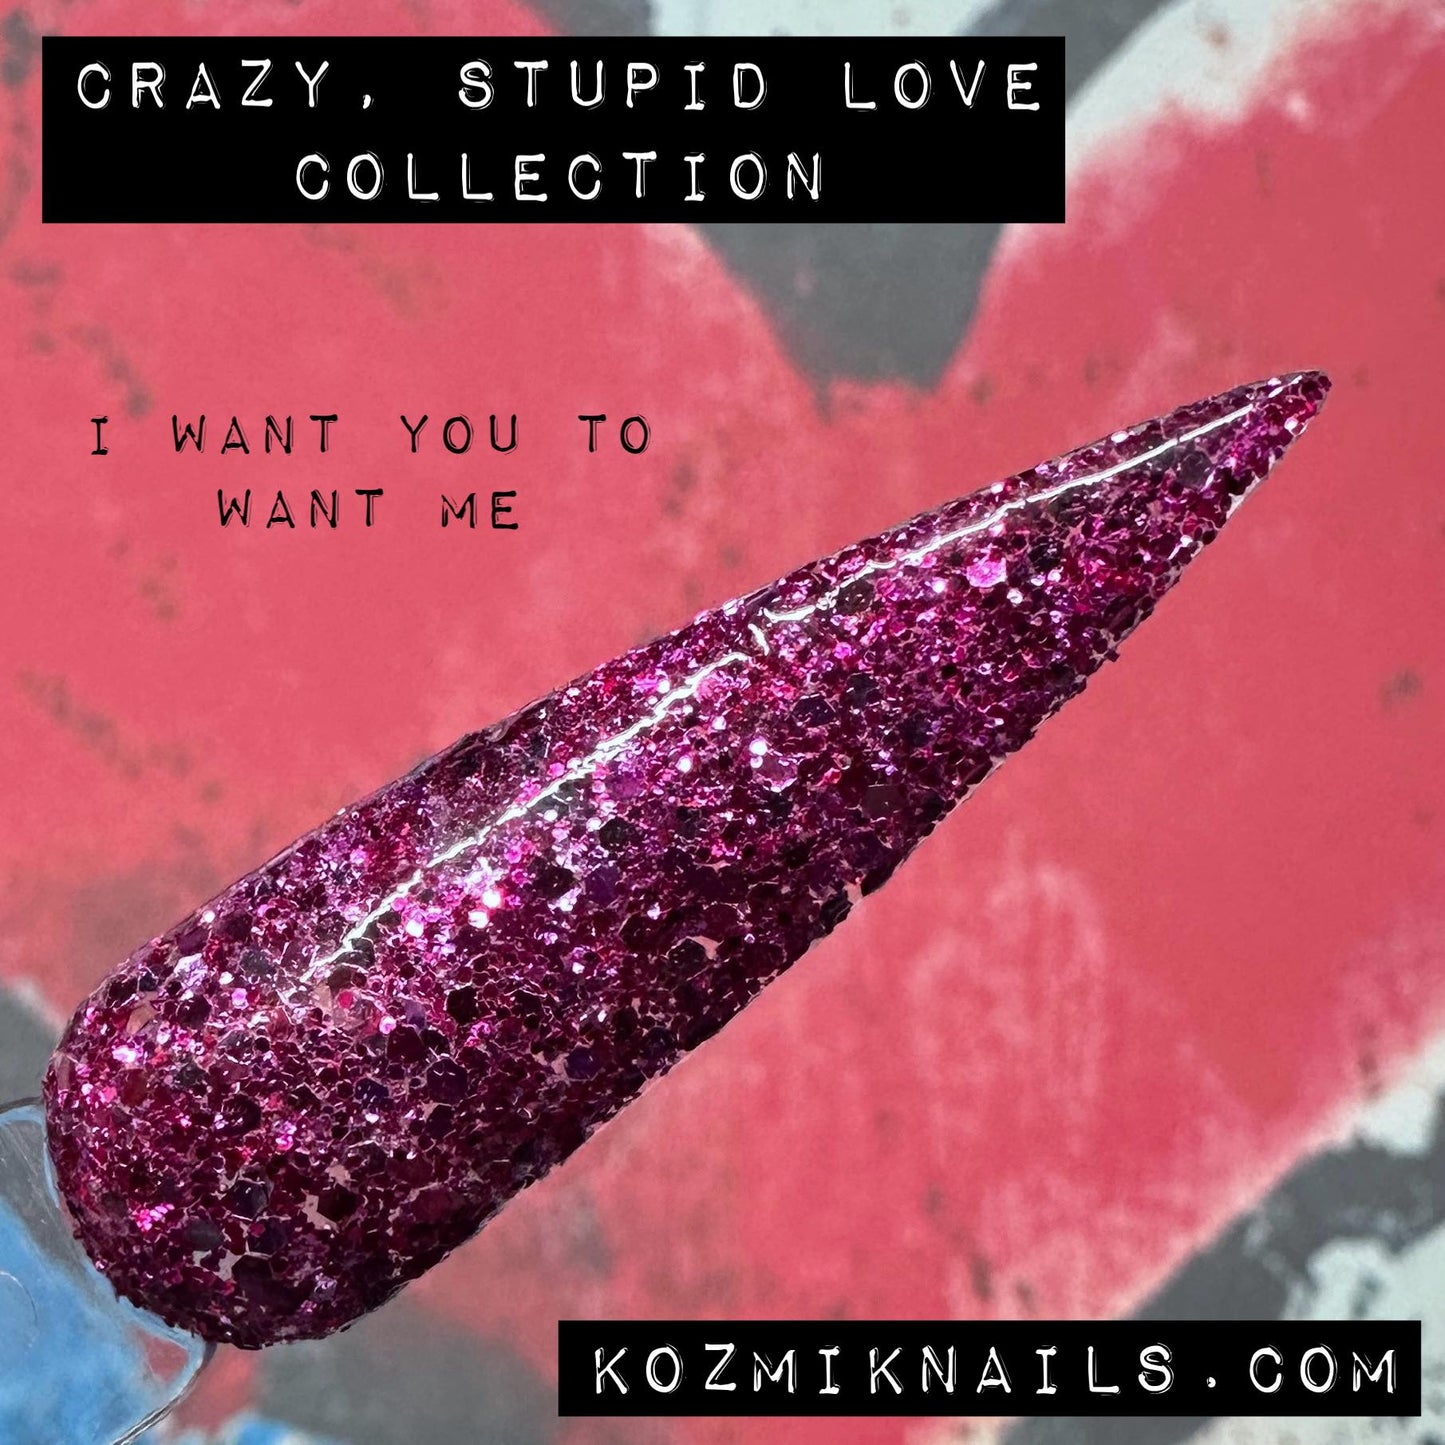 Crazy, Stupid Love Collection